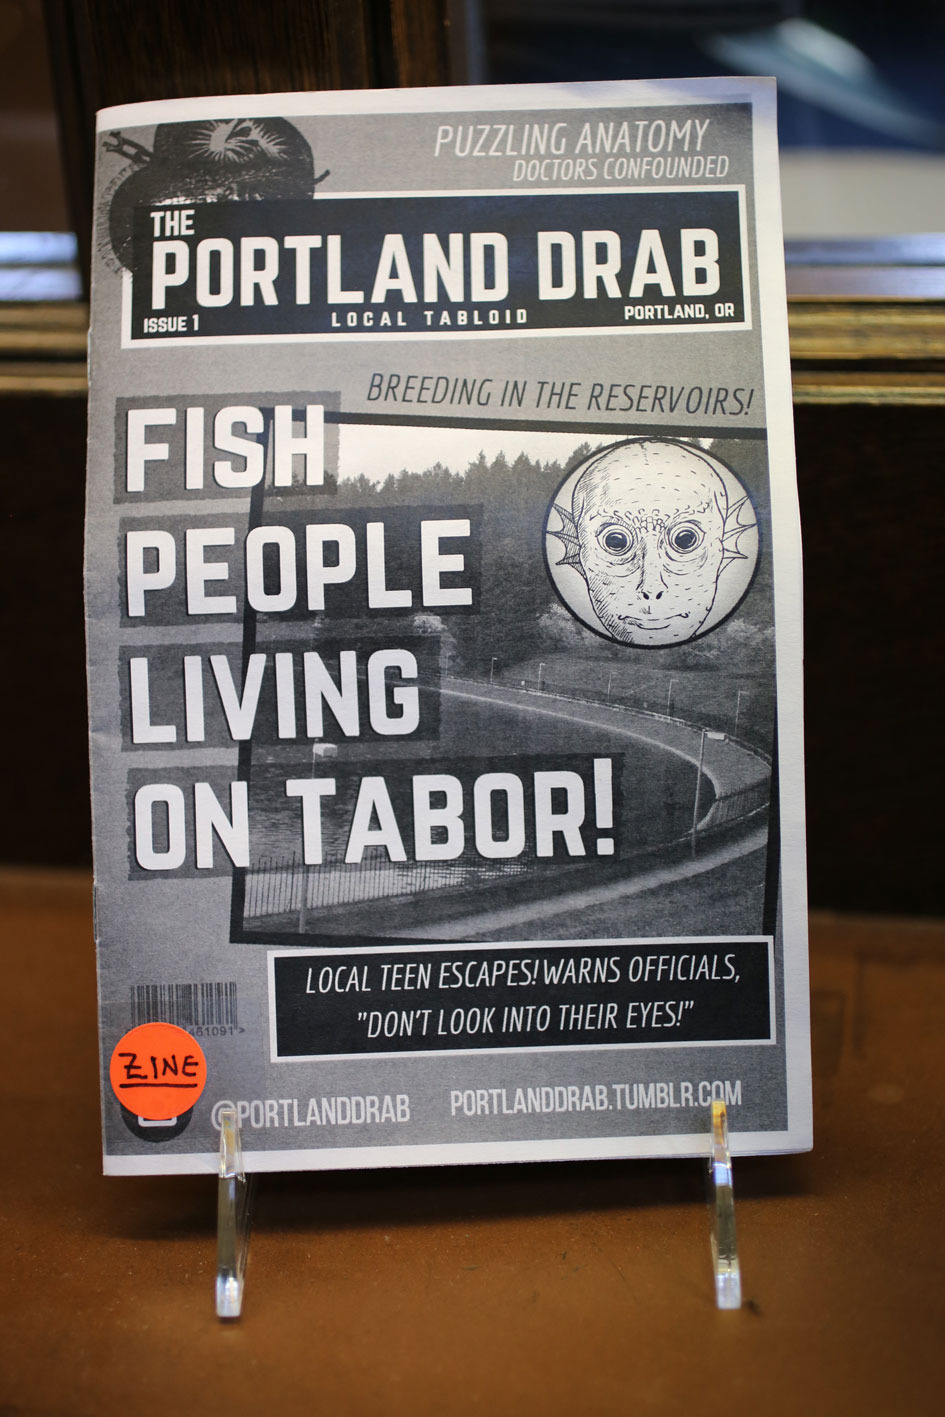 Portland Drab (“Tabloid for Portland urban legends and monster sightings”)